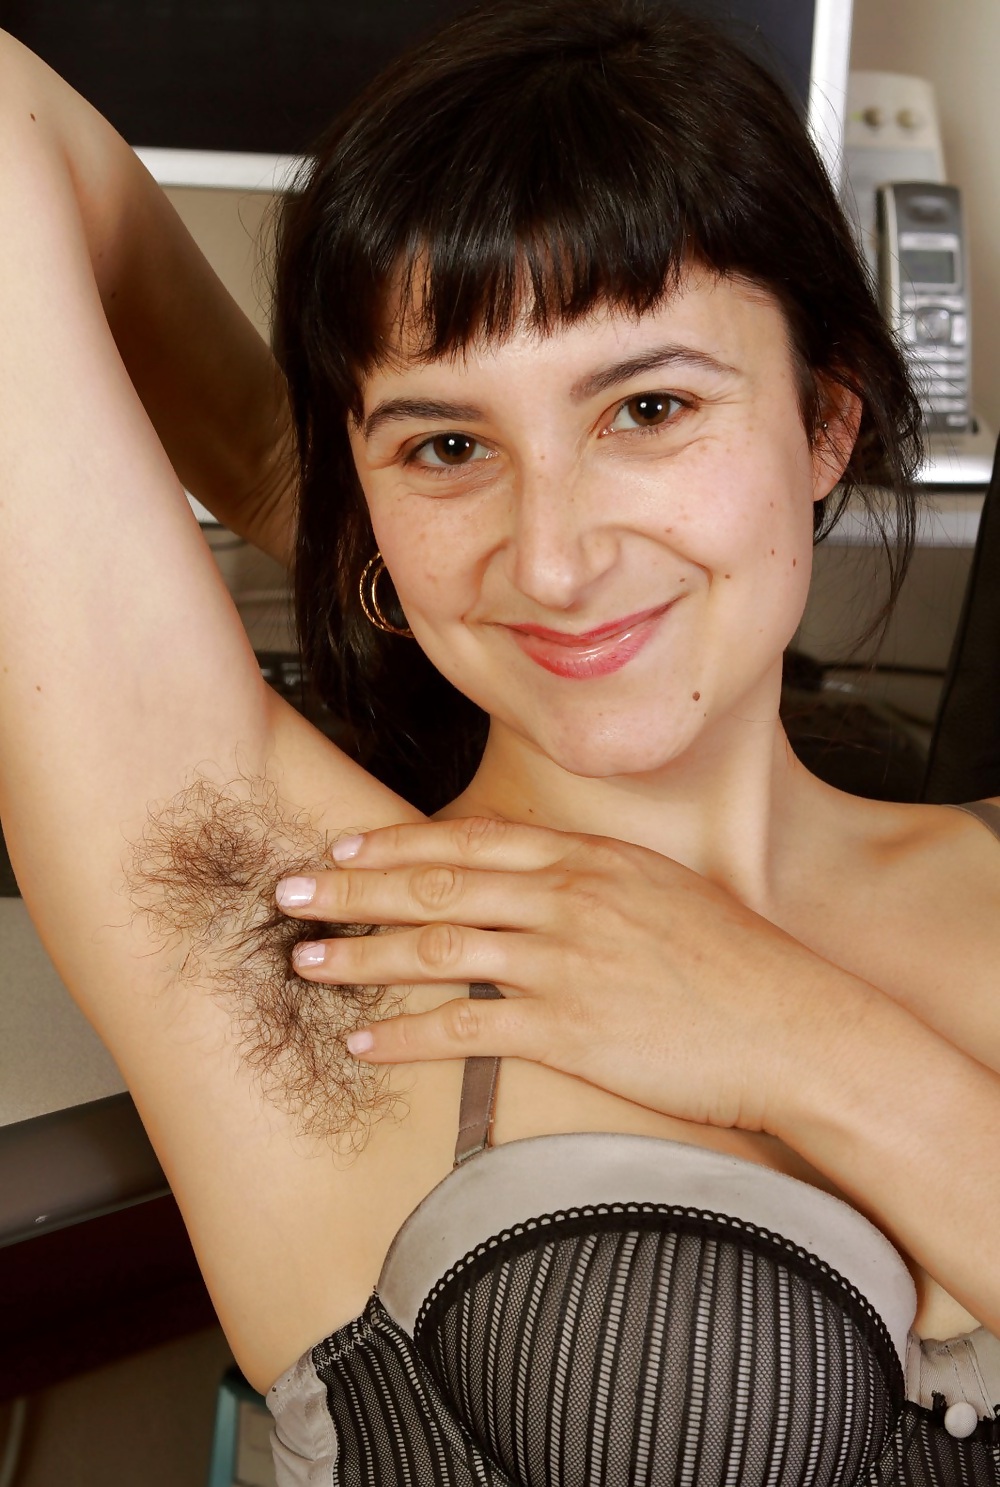 Hairy Armpits - Altaira a real beauty #25297048